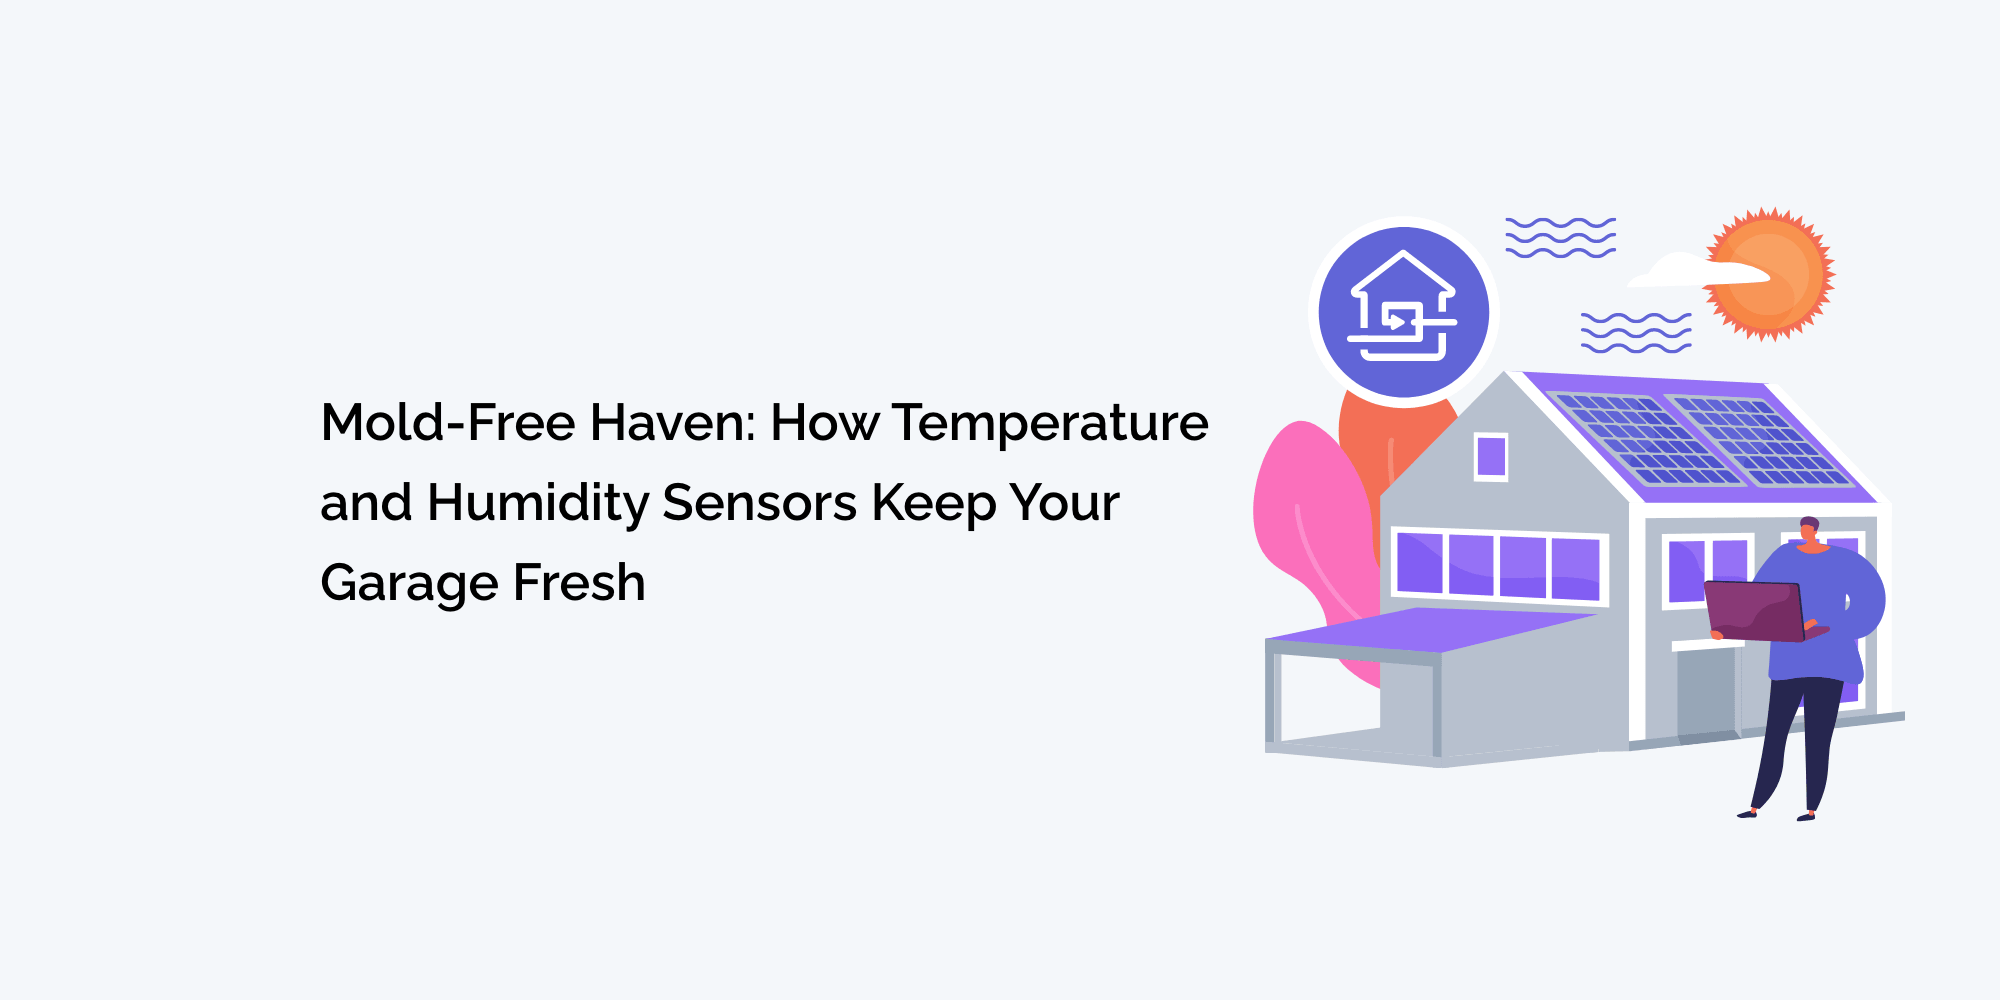 Mold-Free Haven: How Temperature and Humidity Sensors Keep Your Garage Fresh